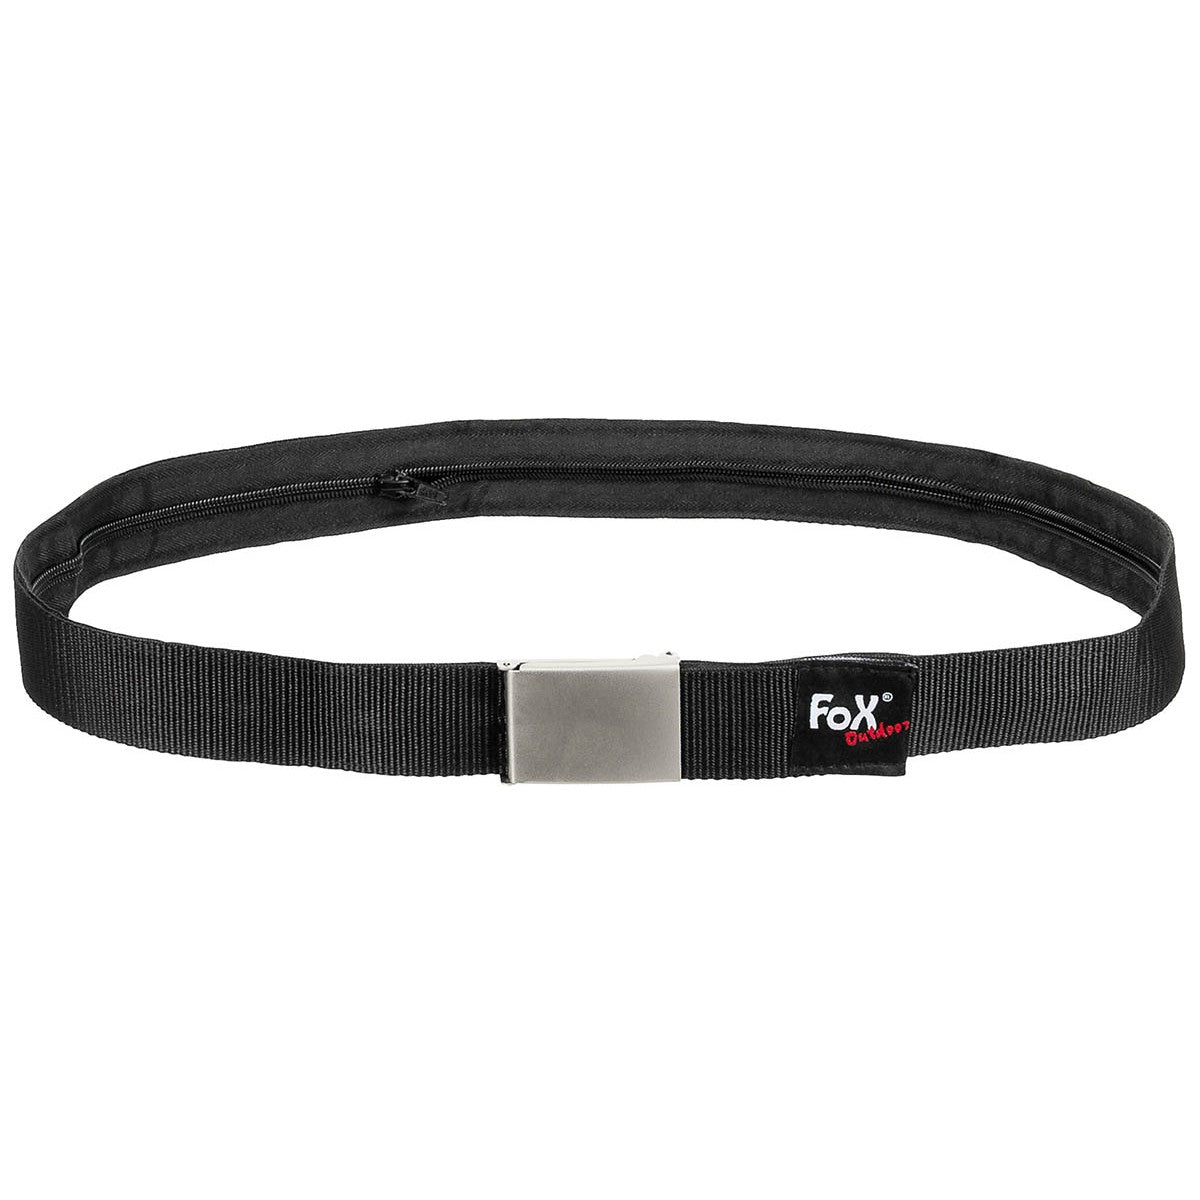 Belt with inner compartment, black, approx. 4 cm